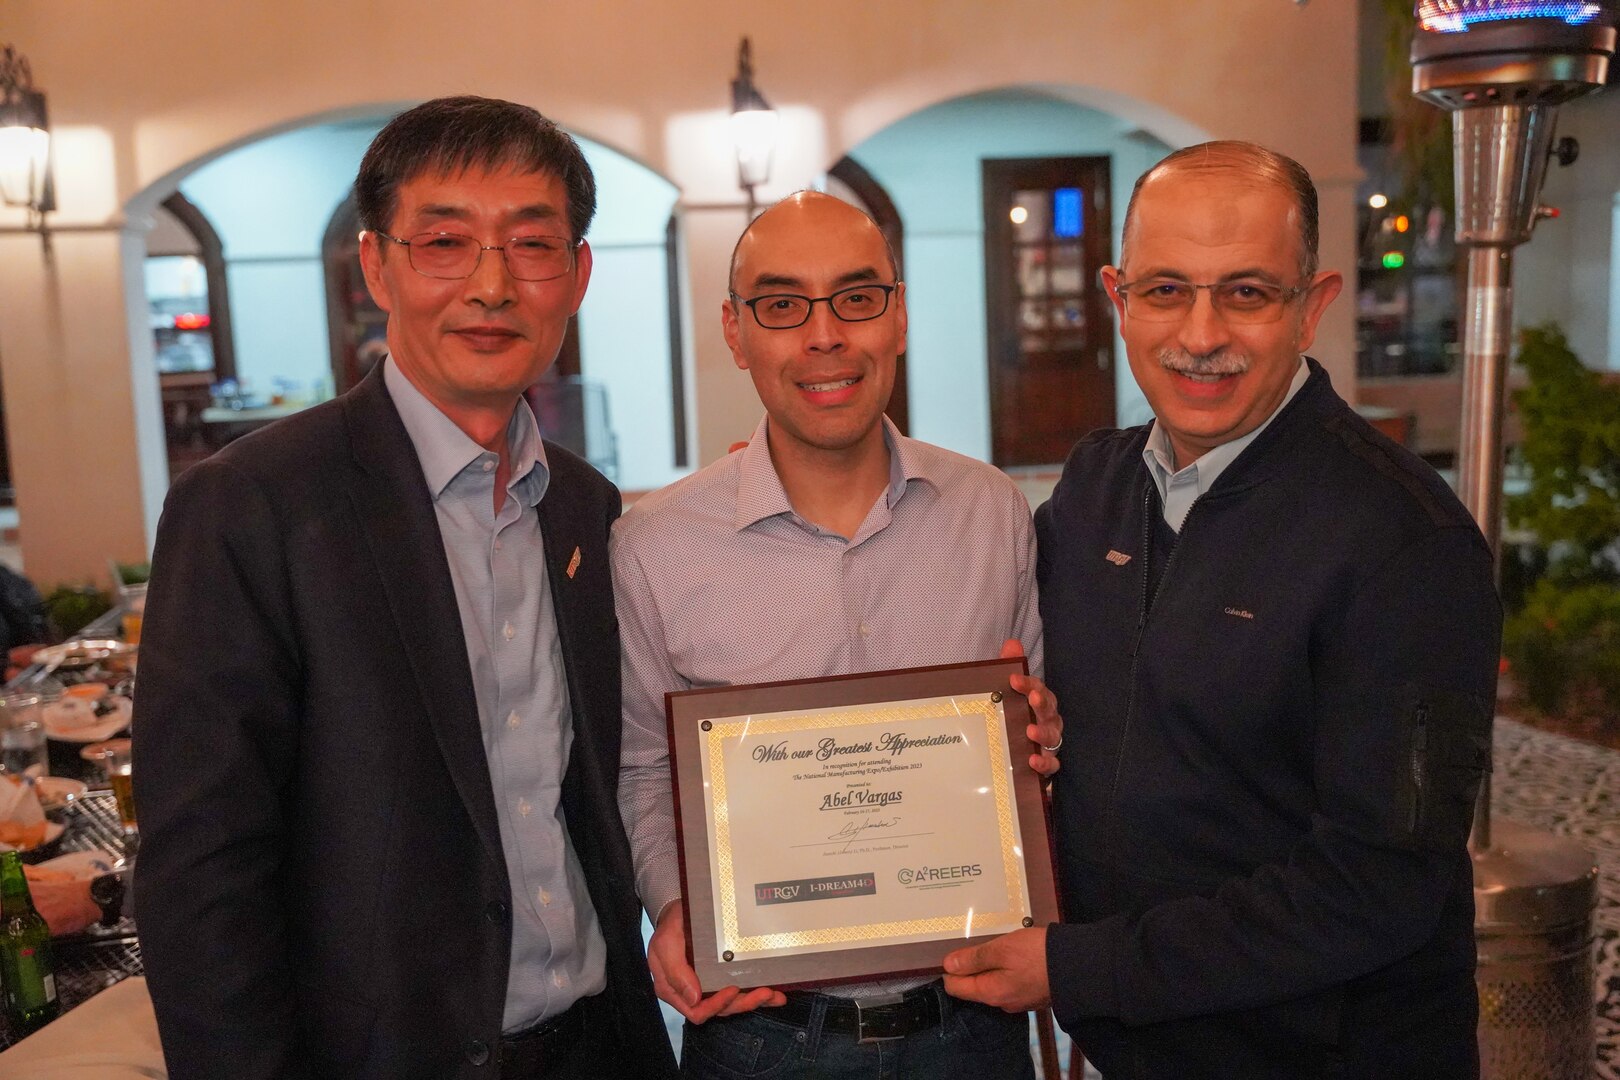 Carderock's Dr. Abel Vargas (center) is presented with a certificate of appreciation for his participation in the 2023 Manufacturing Expo from Dr. James Li (left), the Director of I-DREAM4D and Chair of the Manufacturing and Industrial Engineering, and Dr. Ala Qubbaj (right), University of Texas Rio Grande Valley Dean for the College of Engineering and Computer Science, in Edinburg, Texas, from Feb. 16-17. (Photo provided by Dr. Abel Vargas)